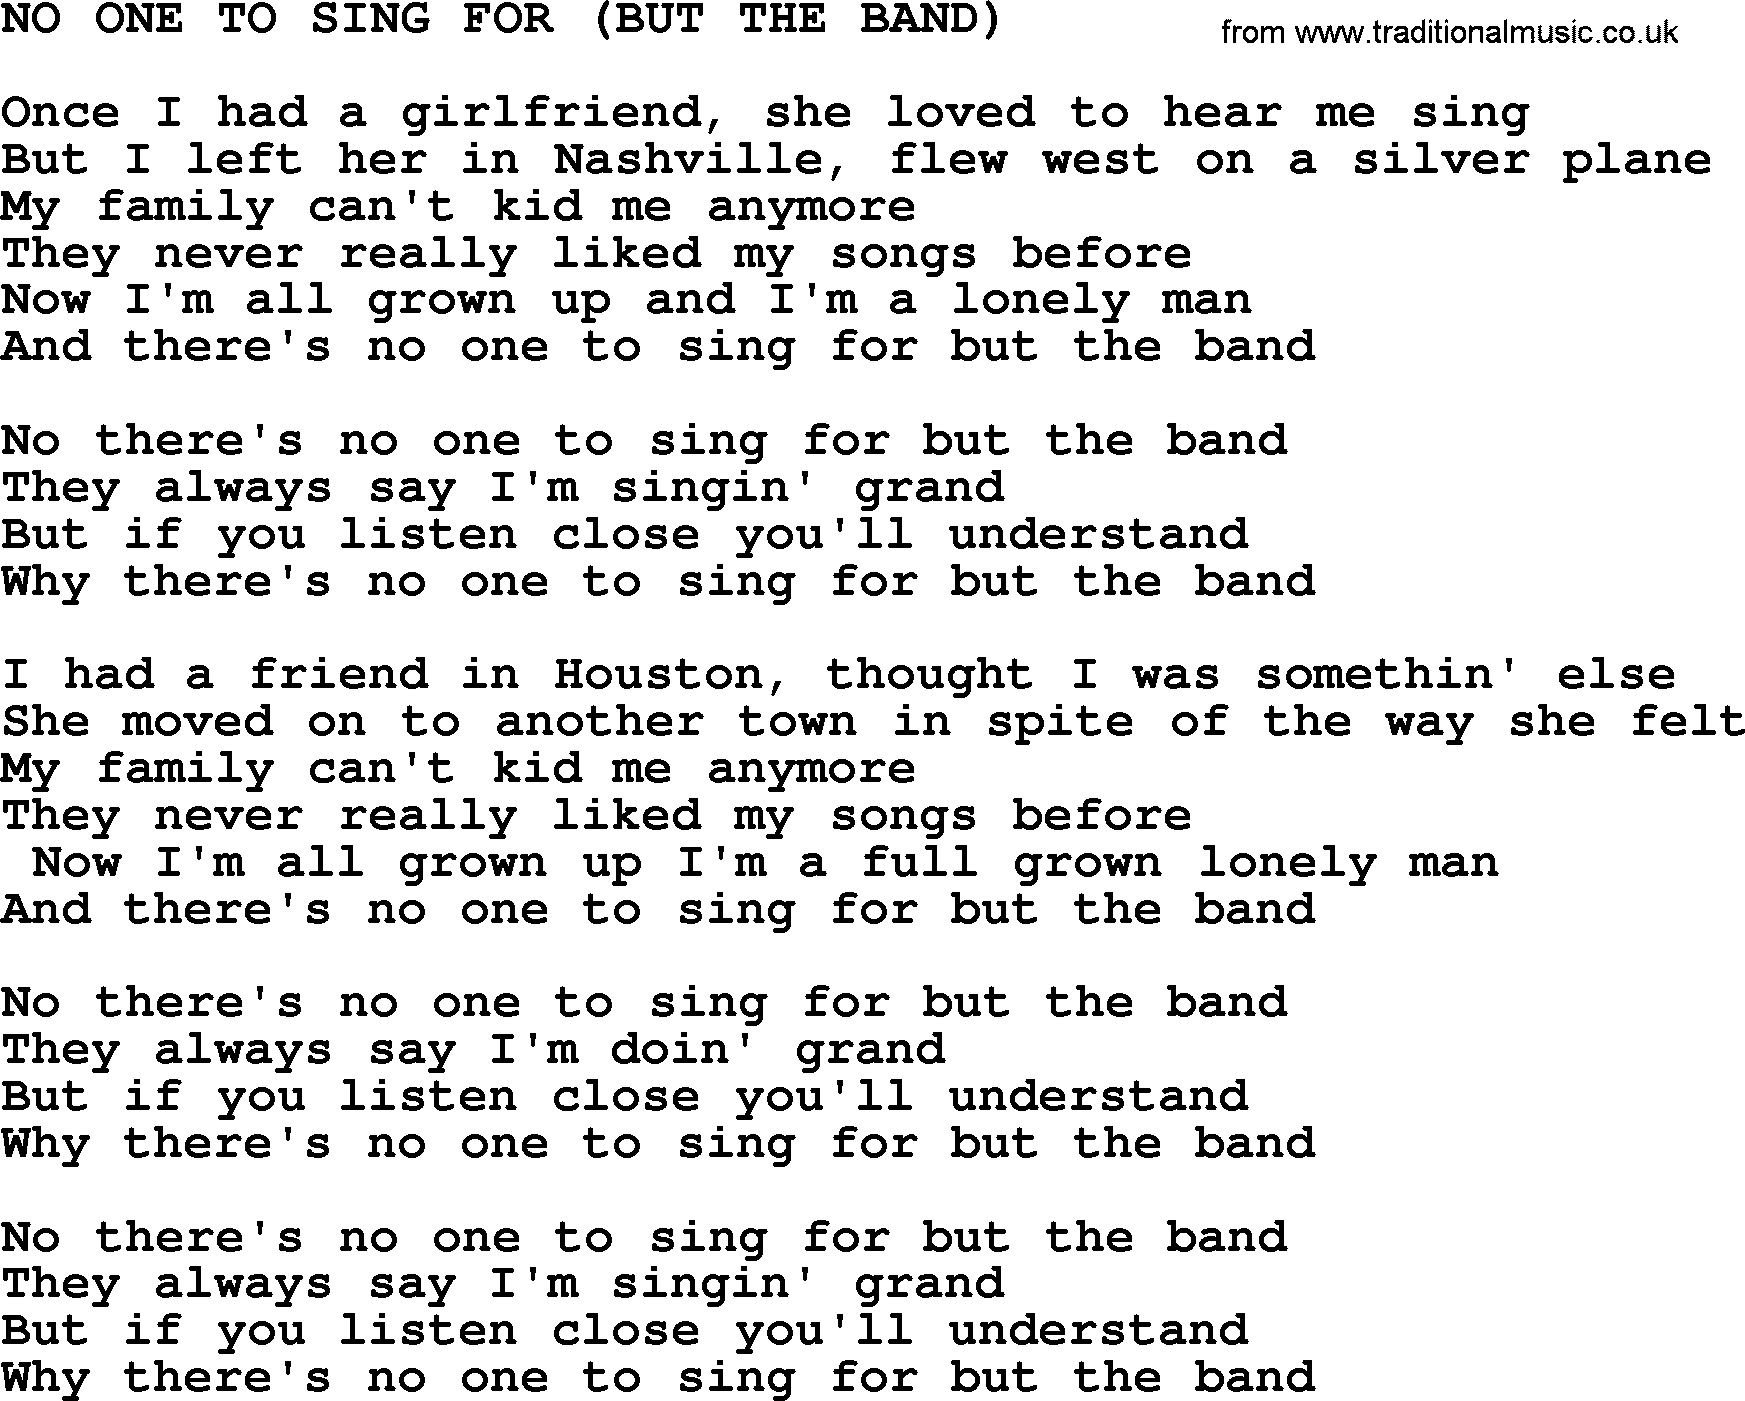 Merle Haggard song: No One To Sing For But The Band, lyrics.